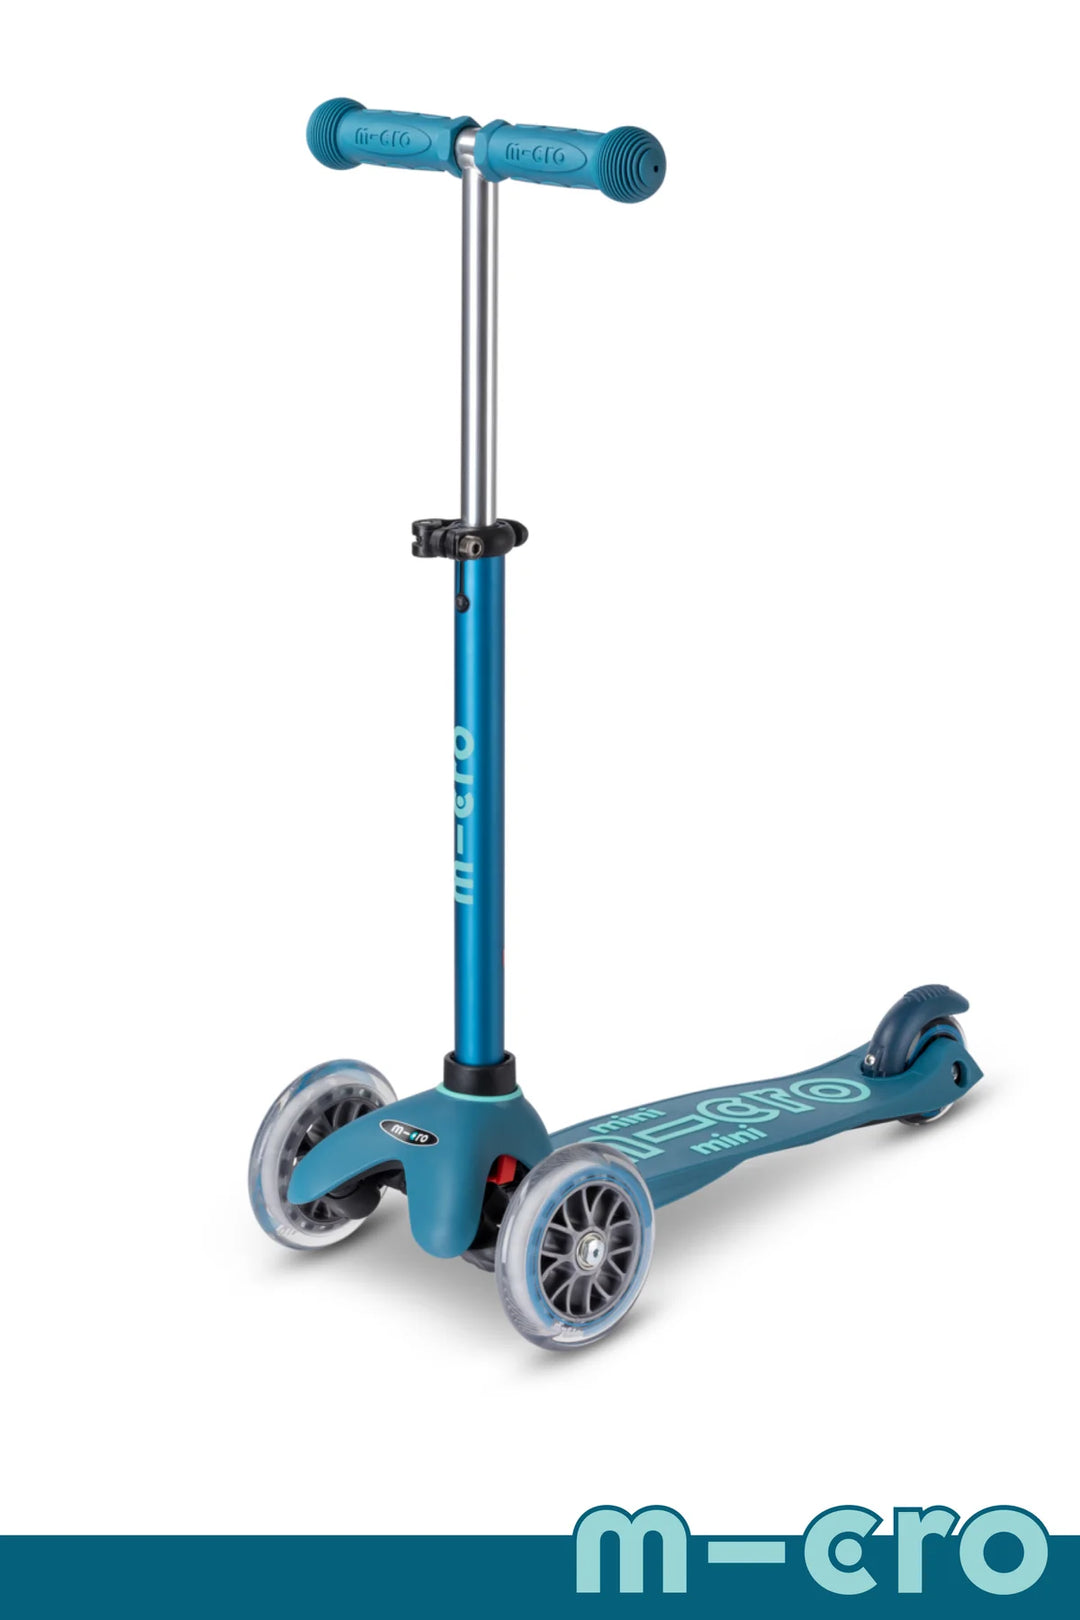 Micro Mini Deluxe Scooter, Ages 2-5